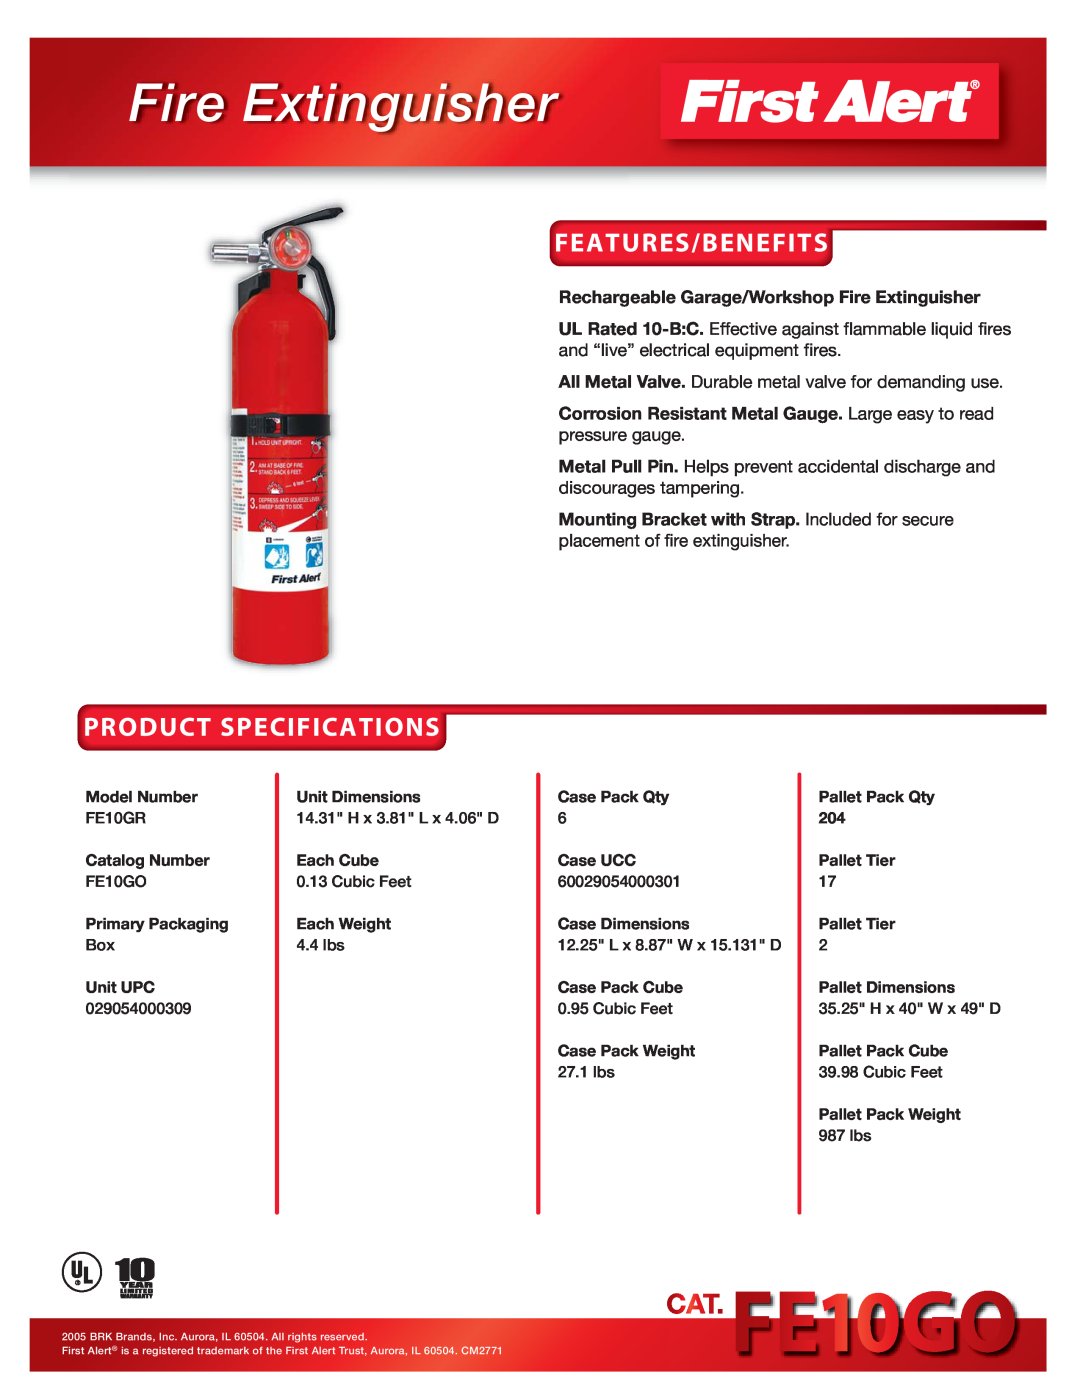 BRK electronic FE10GO specifications Fire Extinguisher, Features/Benefits, Product Specifications 